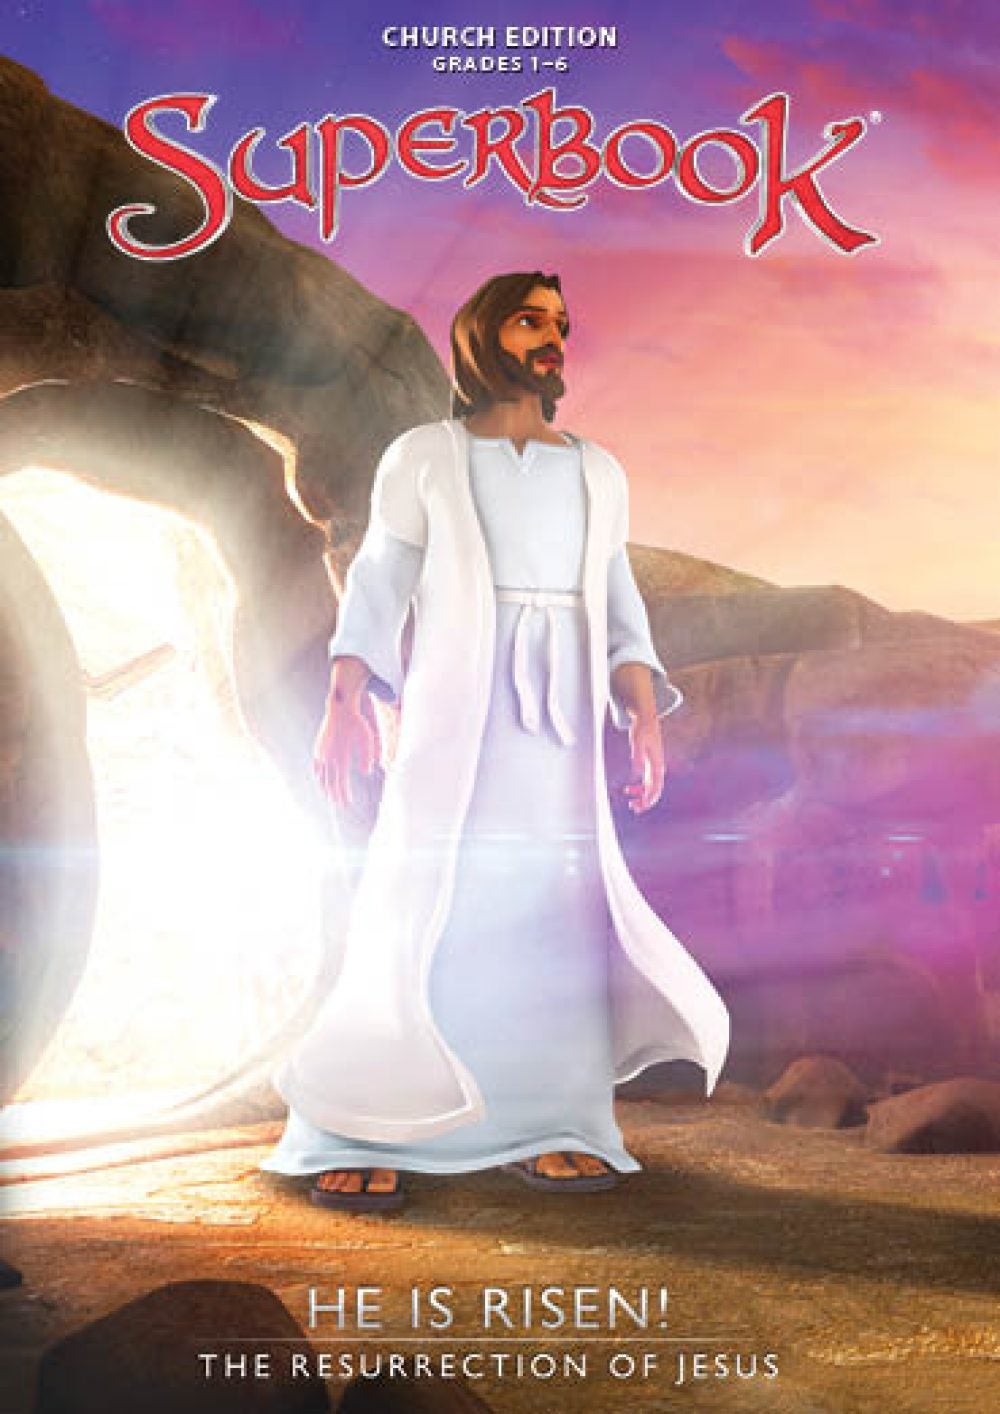 He Is Risen Essential Collection Superbook Academy